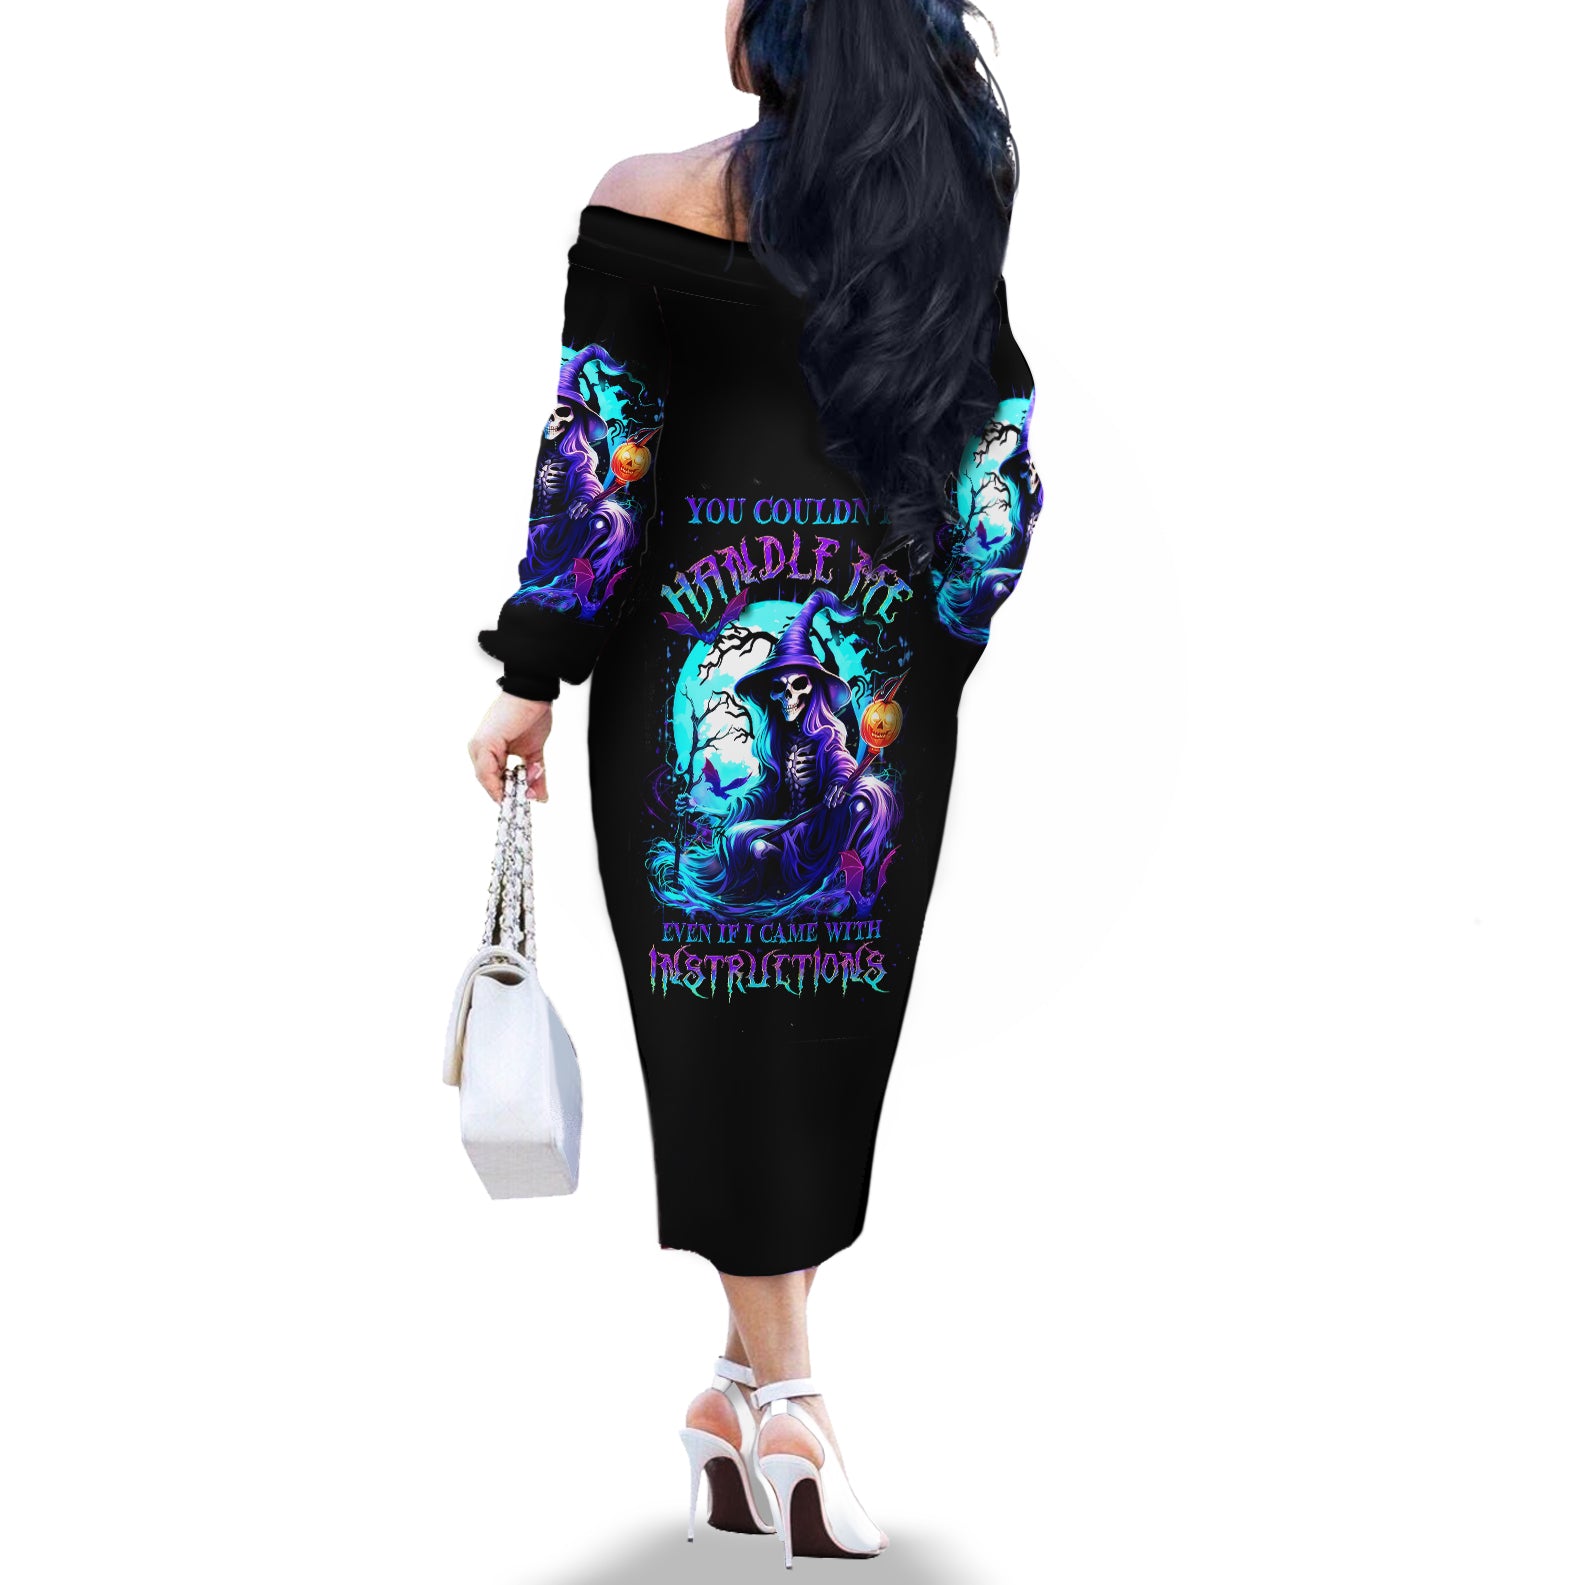 witch-skull-off-the-shoulder-long-sleeve-dress-you-couldnt-handle-me-even-with-intrustions